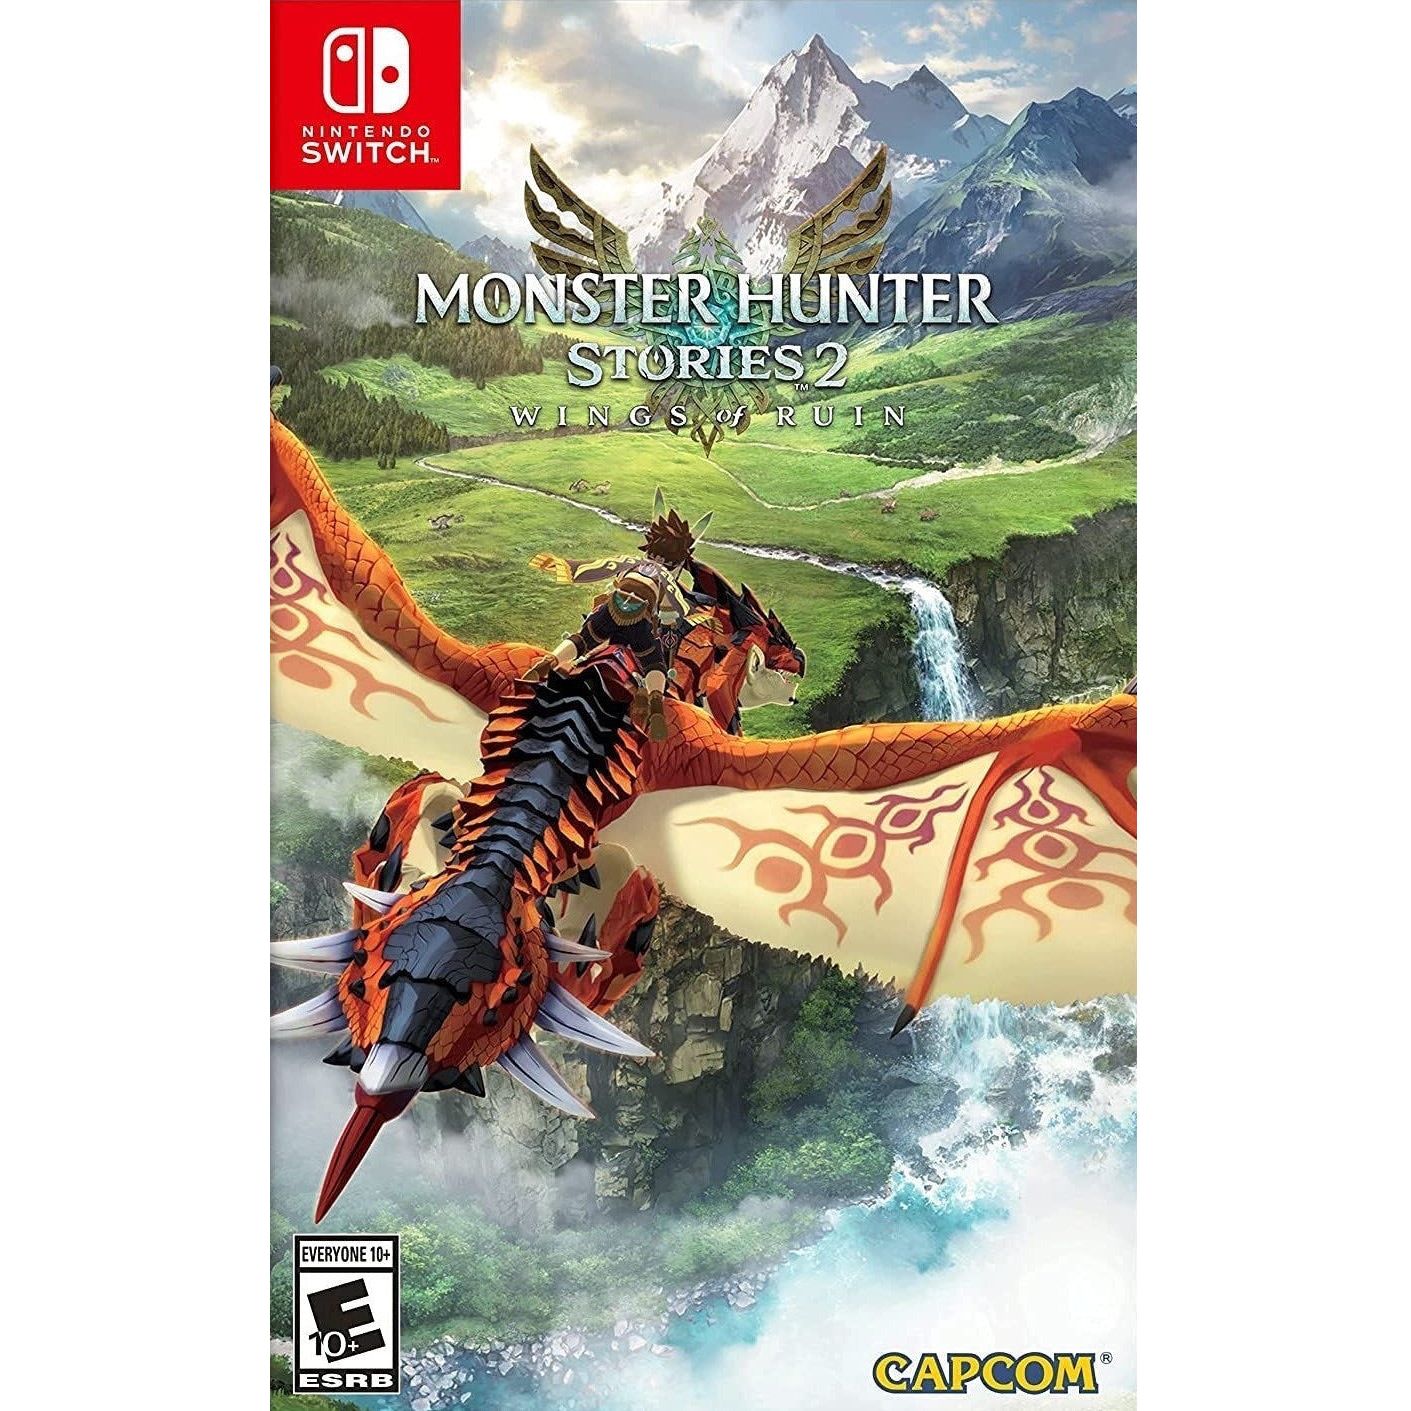 Switch - Monster Hunter Stories 2 Wings of Ruin (In Case)